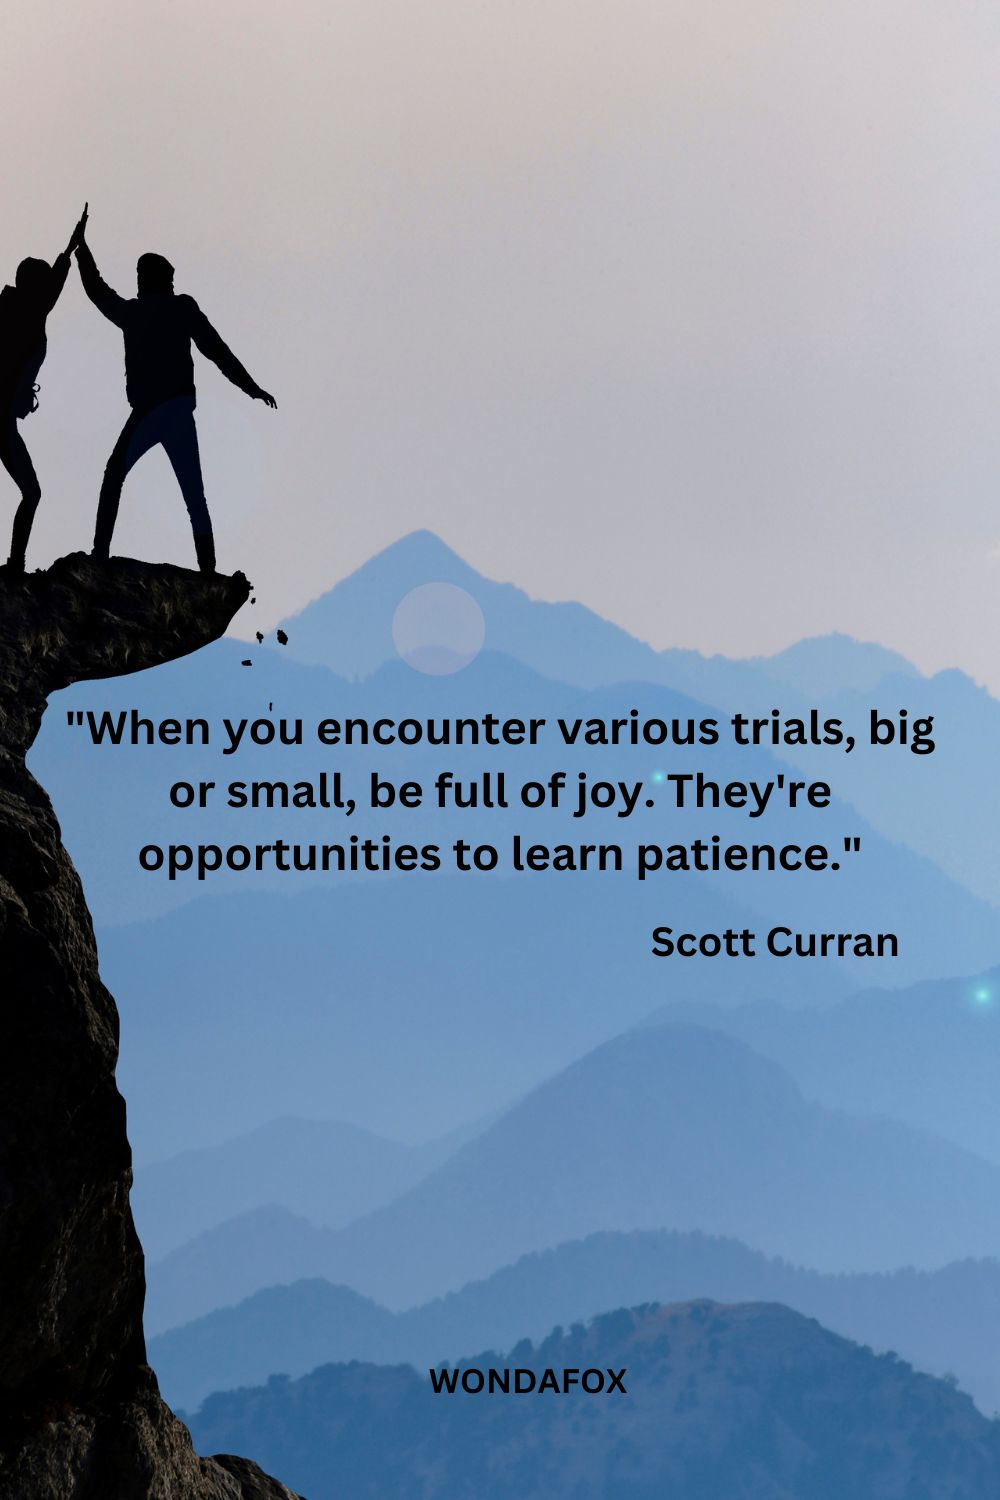 "When you encounter various trials, big or small, be full of joy. They're opportunities to learn patience."
Scott Curran